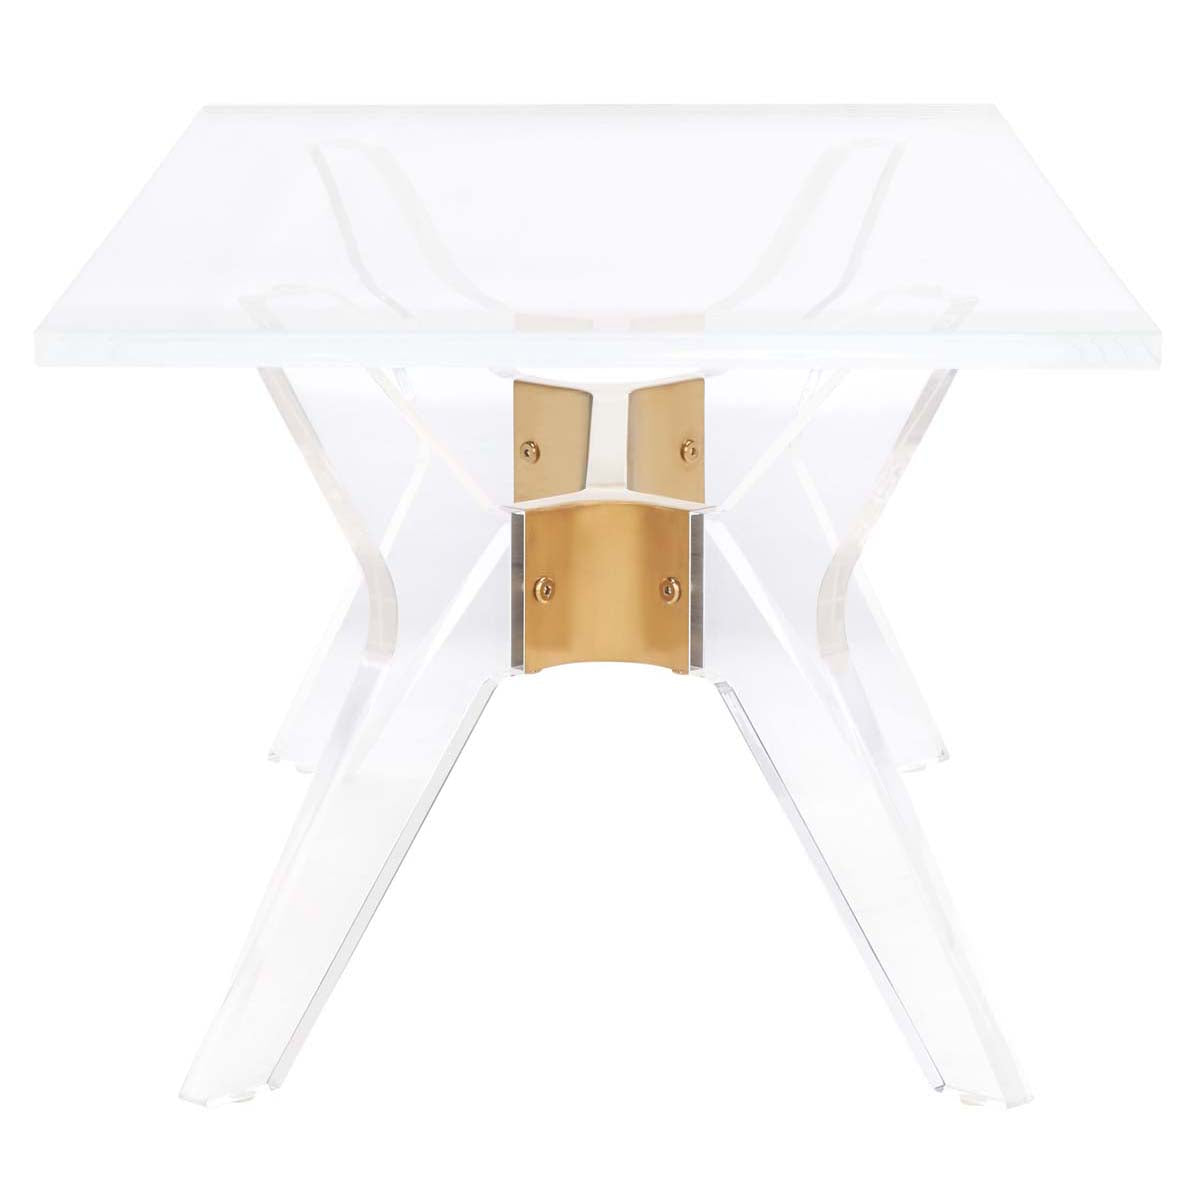 Safavieh Couture Werner Acrylic Coffee Table